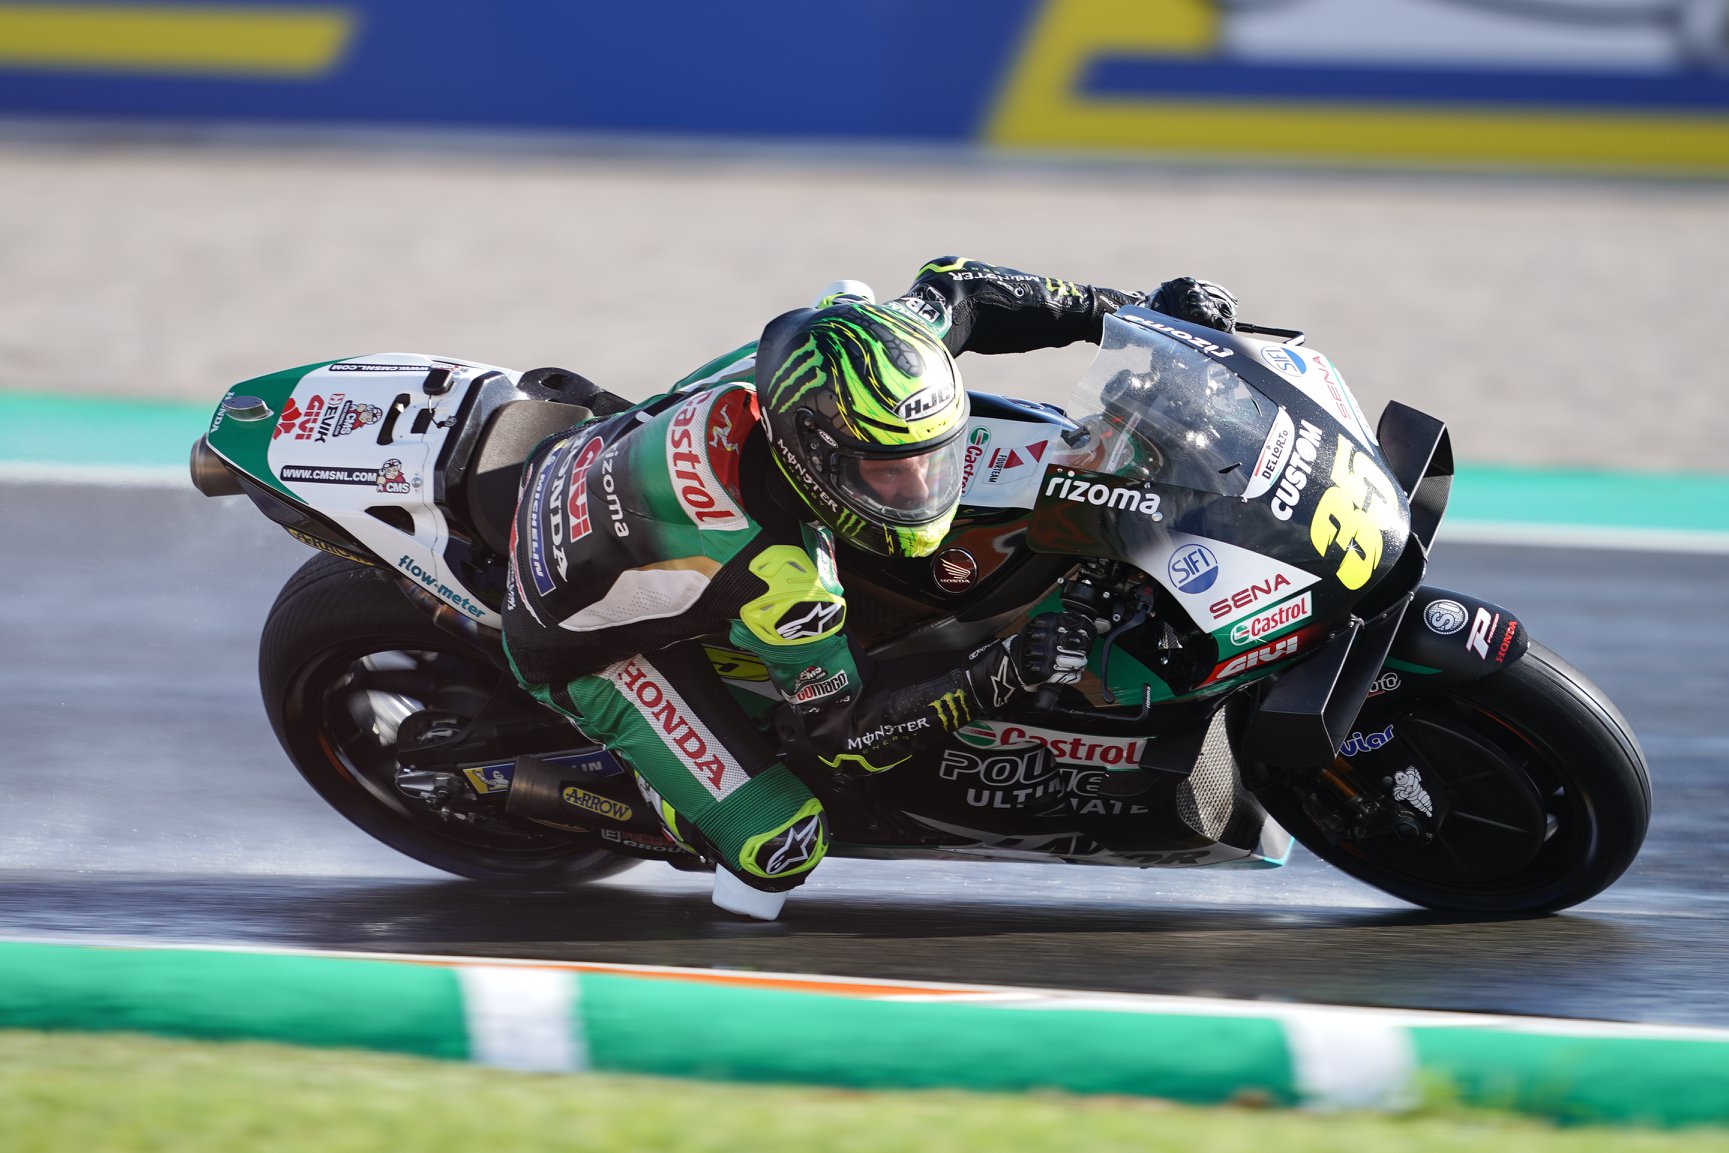 Crutchlow on the fifth row after wet qualifying